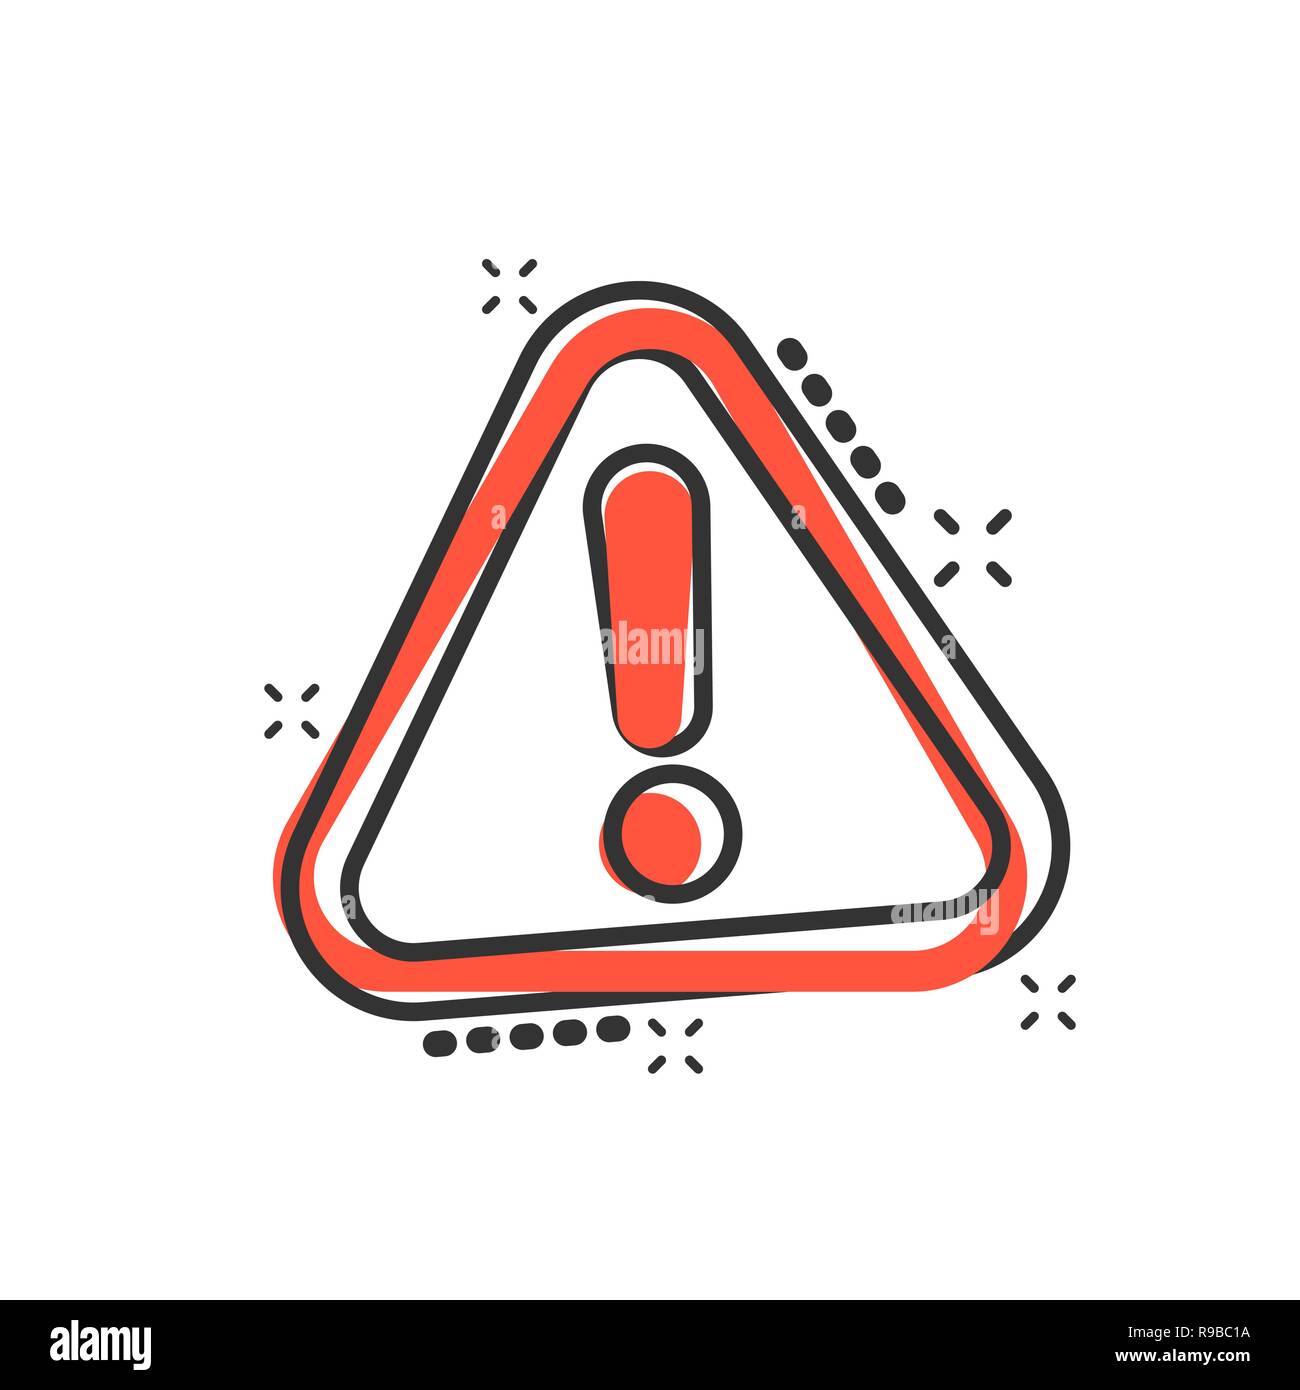 Exclamation mark icon in comic style. Danger alarm vector cartoon illustration pictogram. Caution risk business concept splash effect. Stock Vector